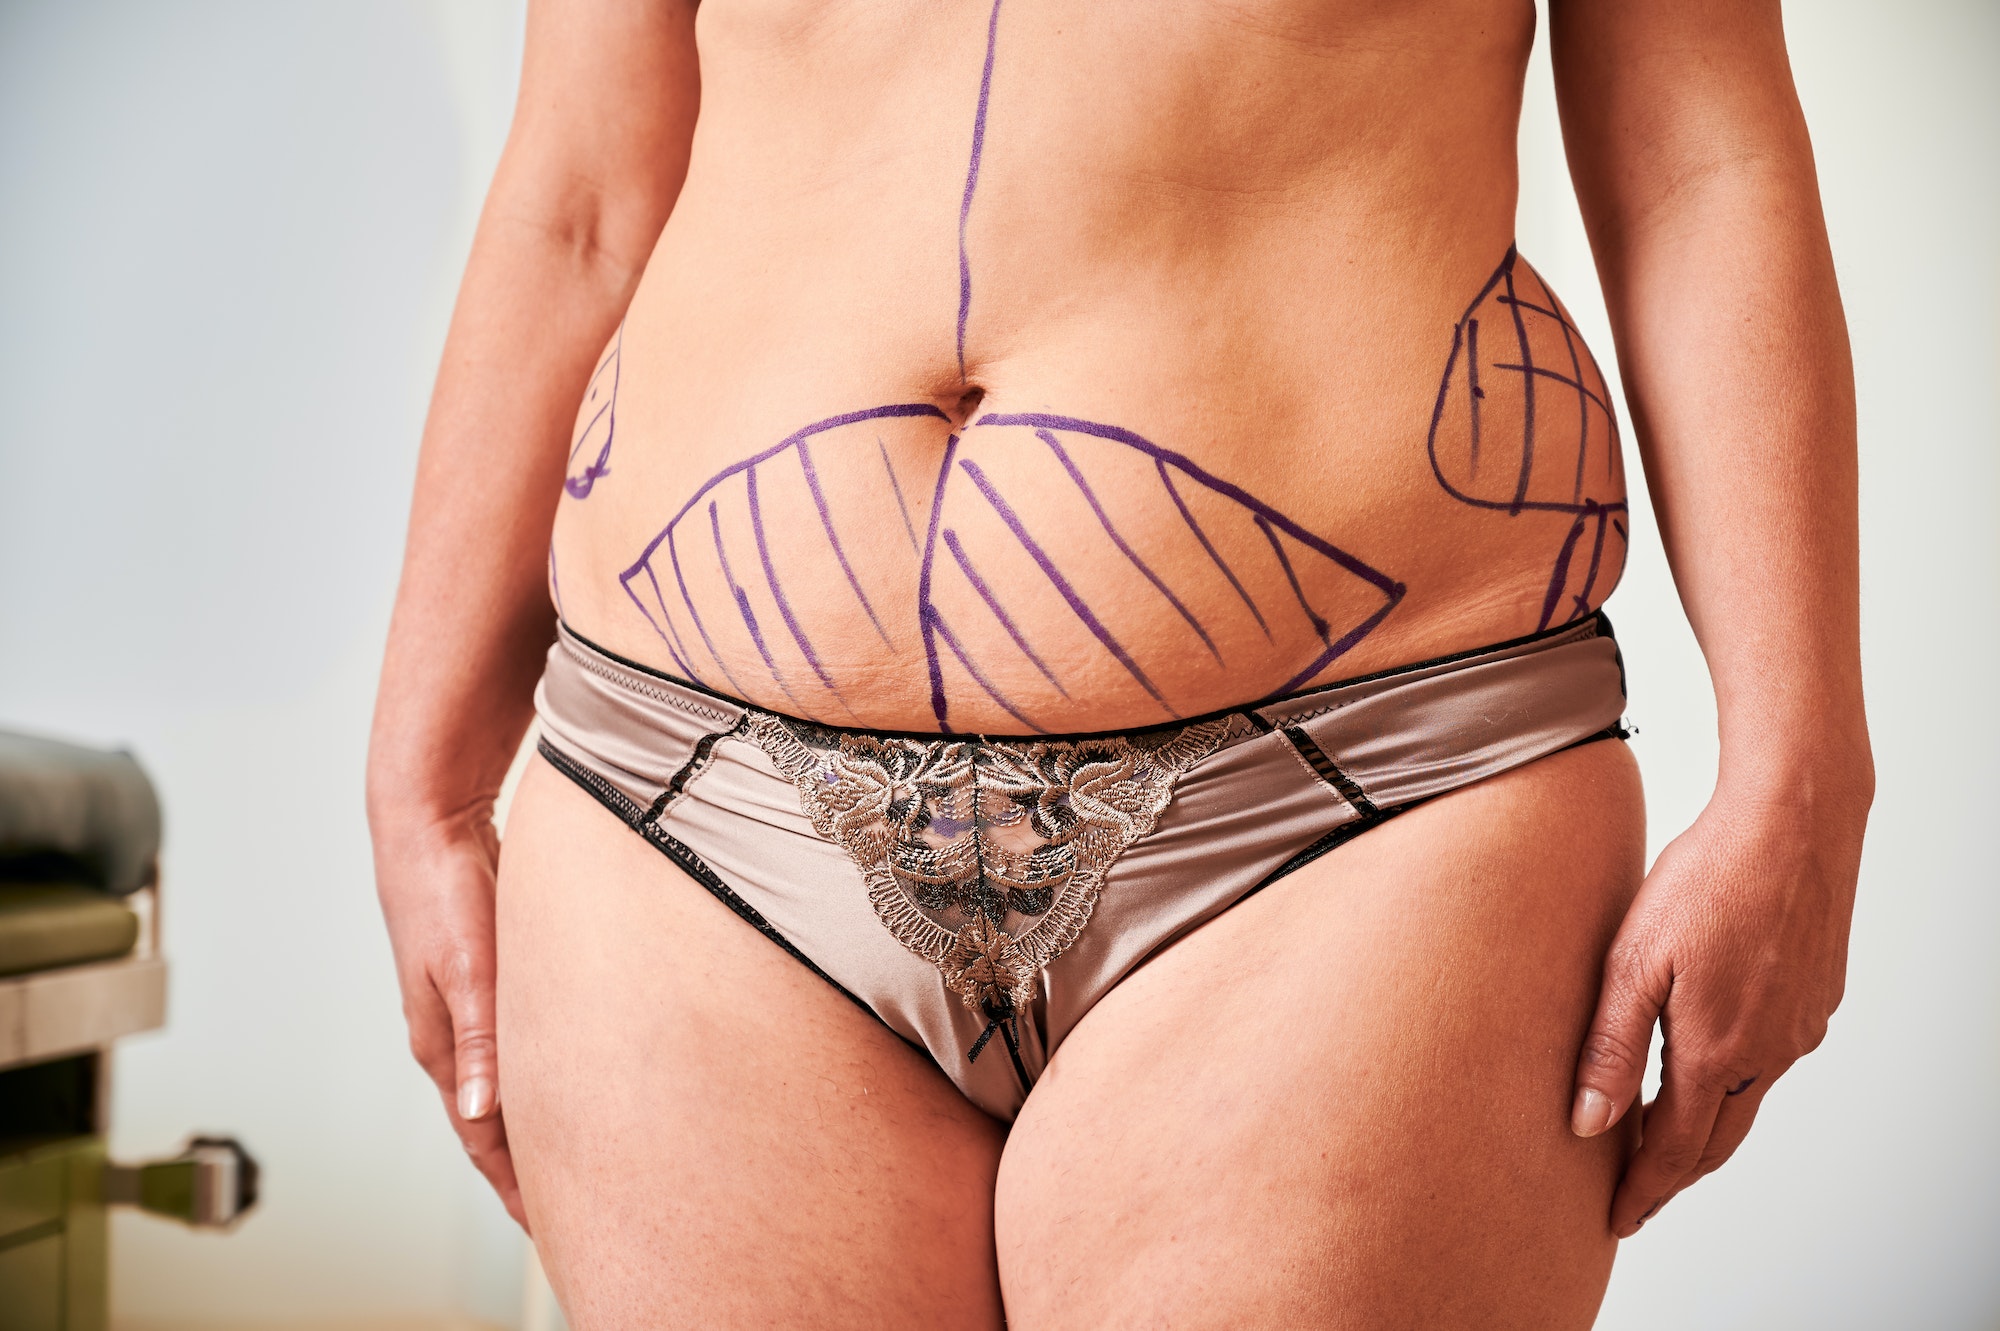 Woman body with marks for plastic surgery.